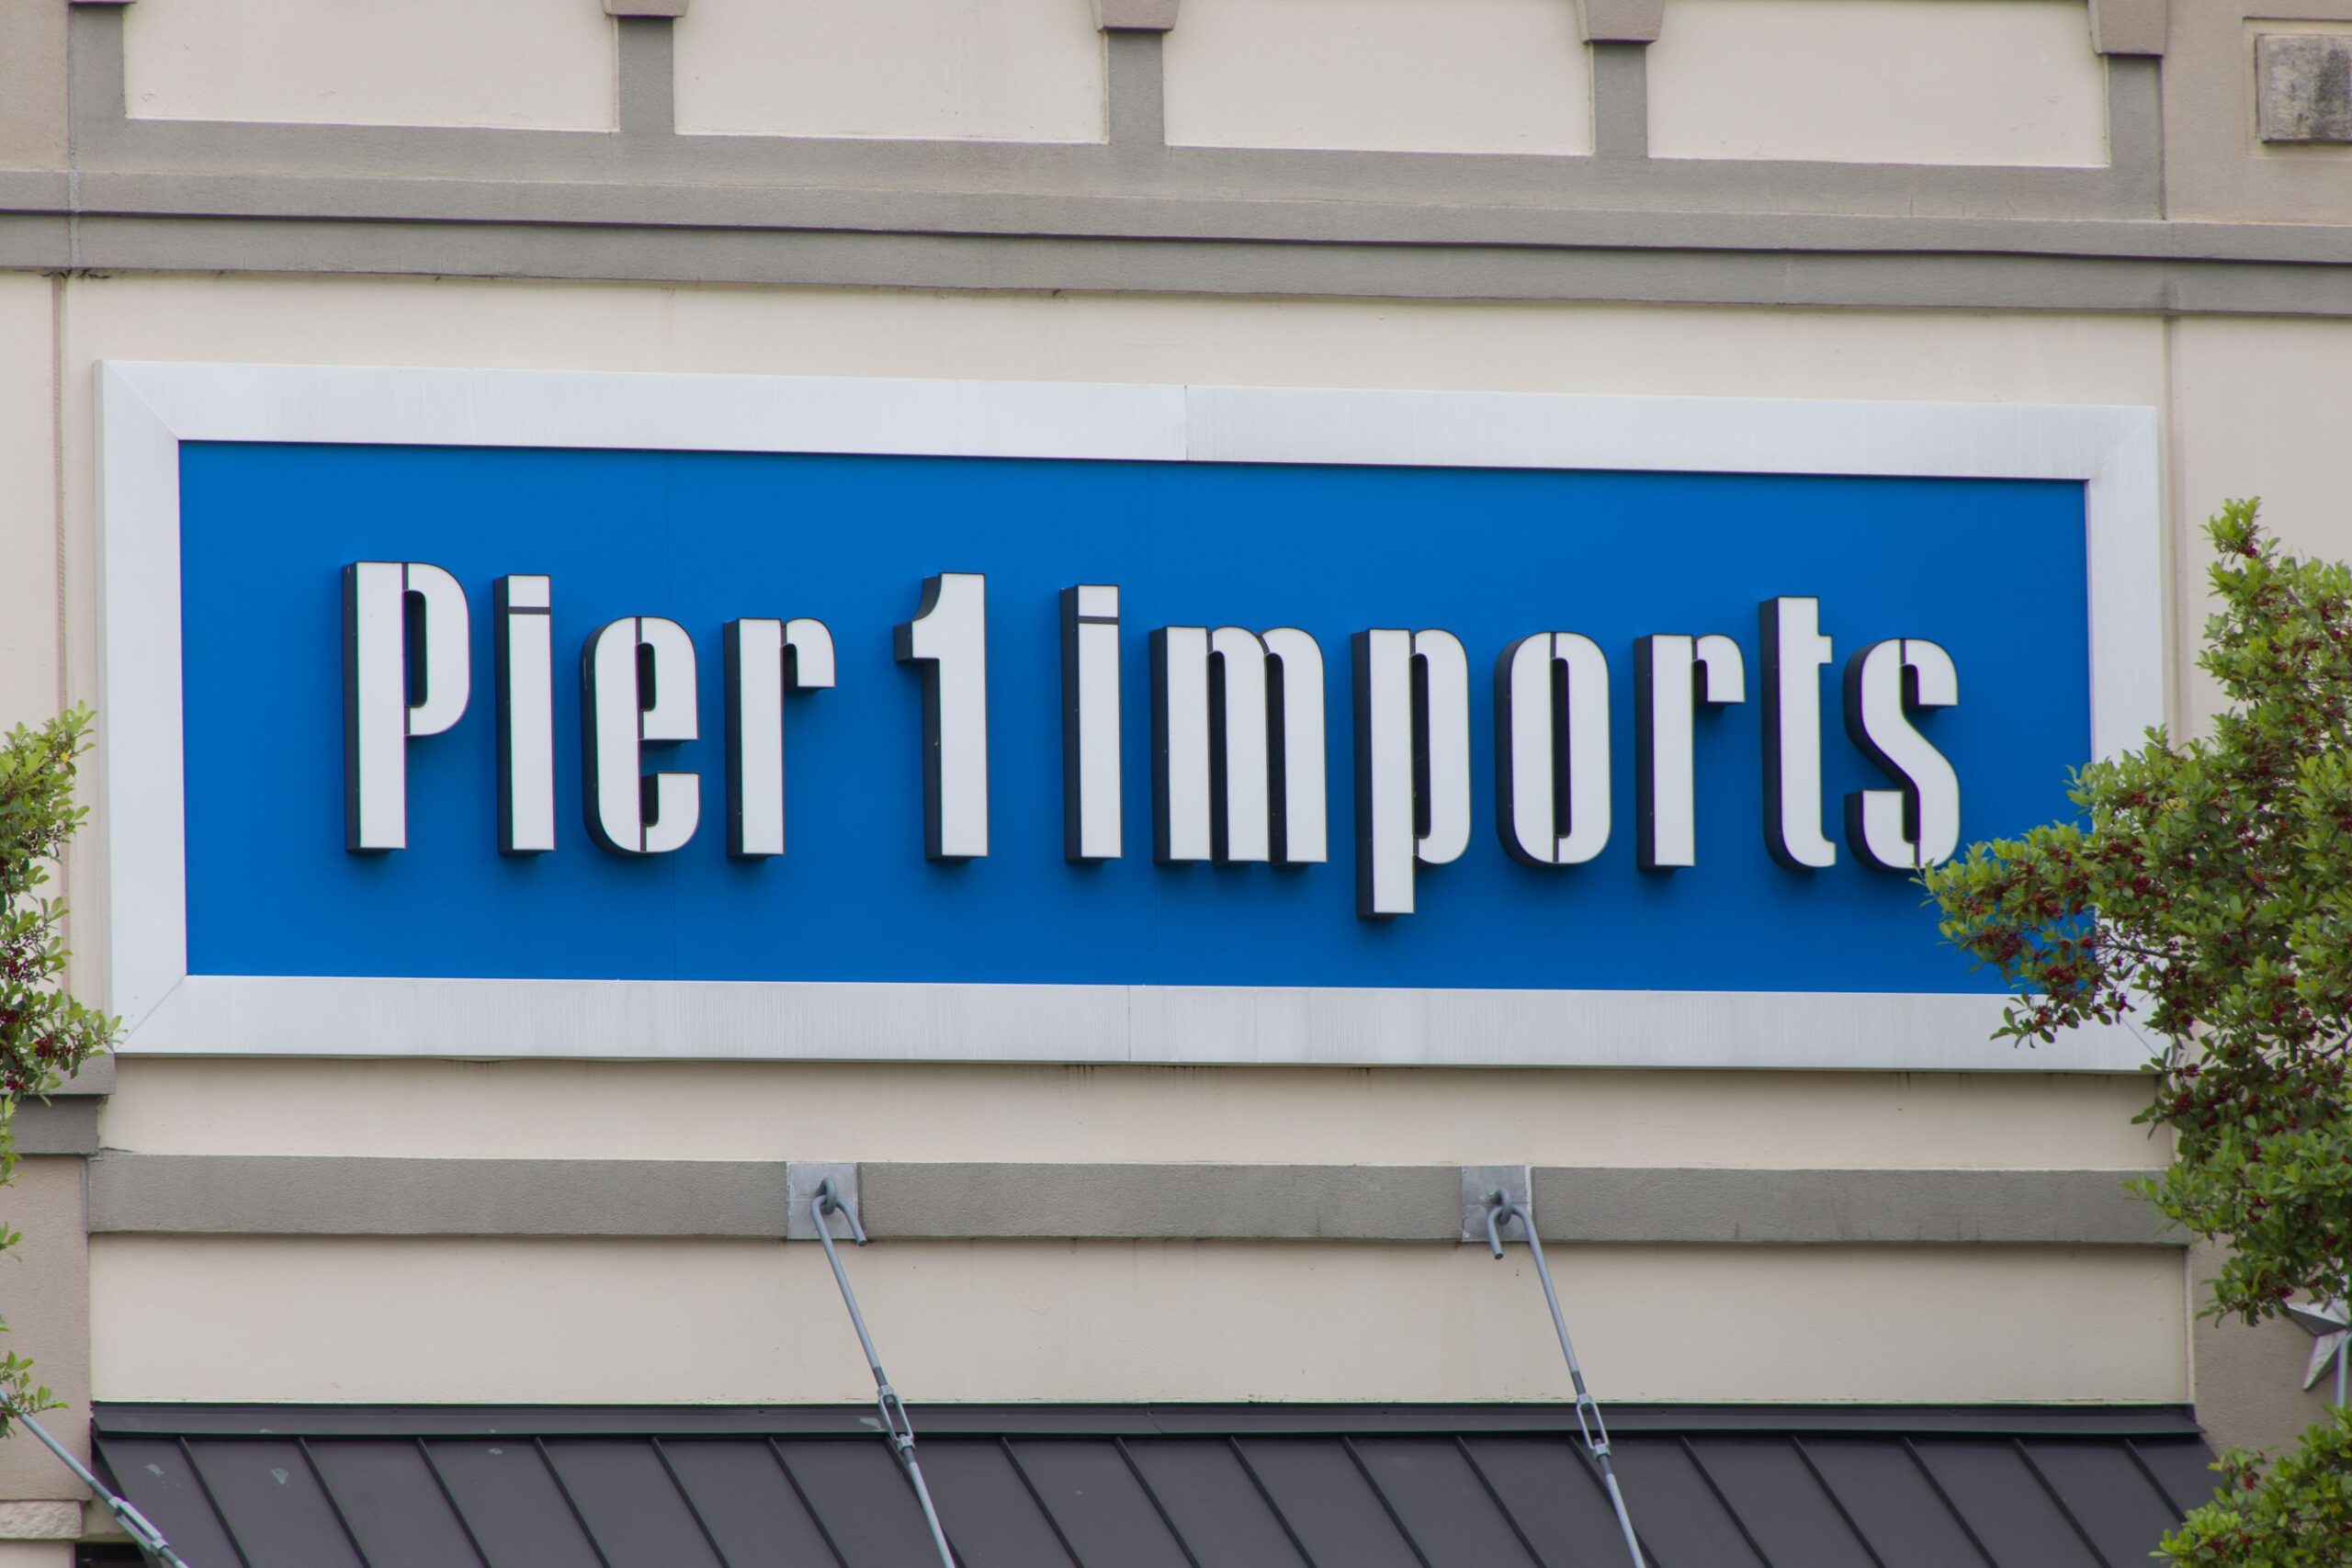 Photo taken on May 20, 2020 shows the logo of a closed Pier 1 store in Frisco of Texas, the United States. U.S. furnishing and decor retailer Pier 1 announced Tuesday that it is asking the bankruptcy court to cease its retail operations "as soon as reasonably possible."